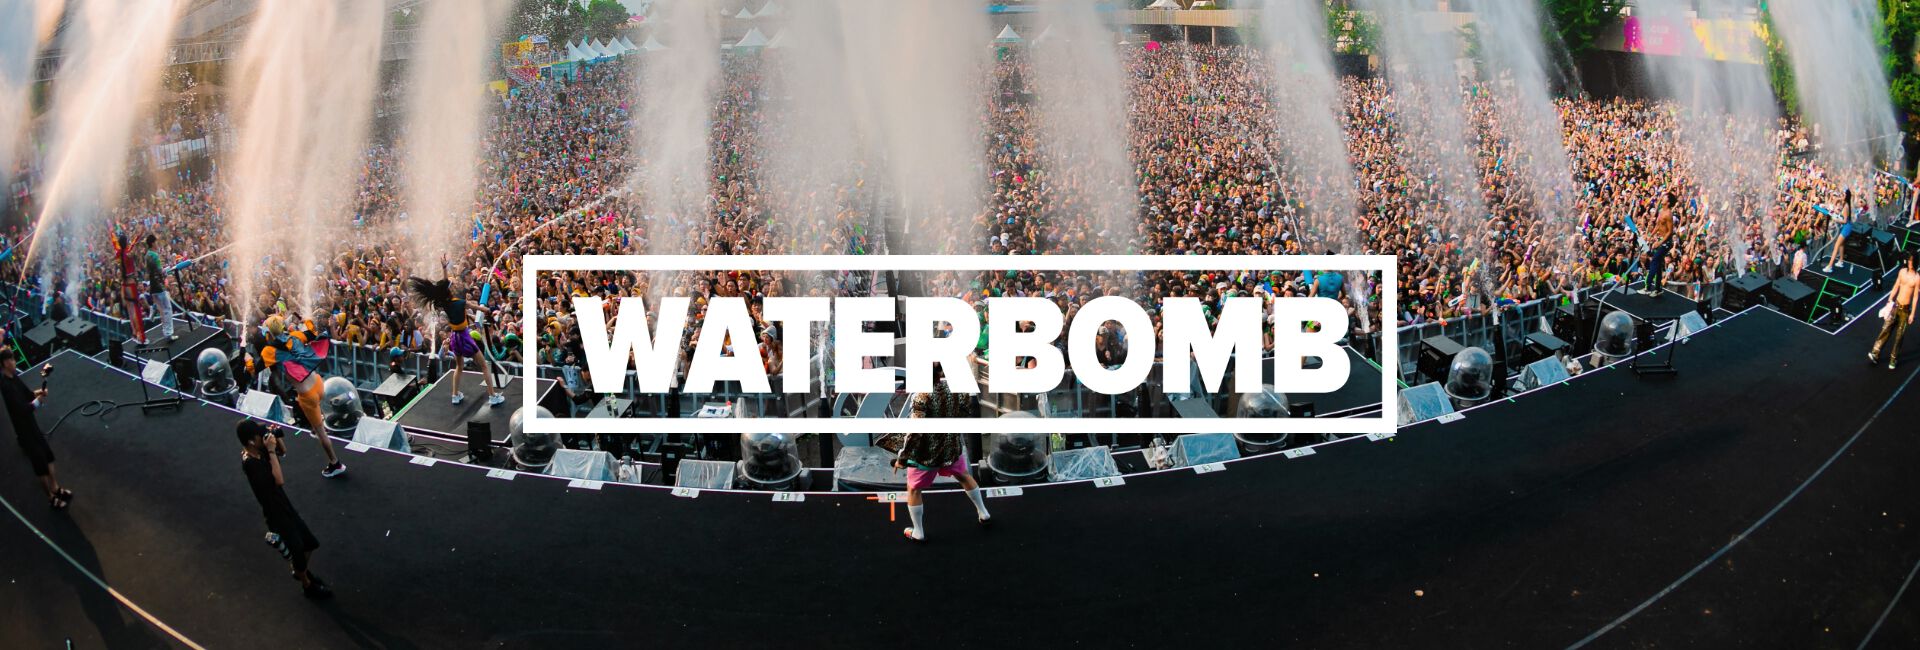 Waterbomb banner